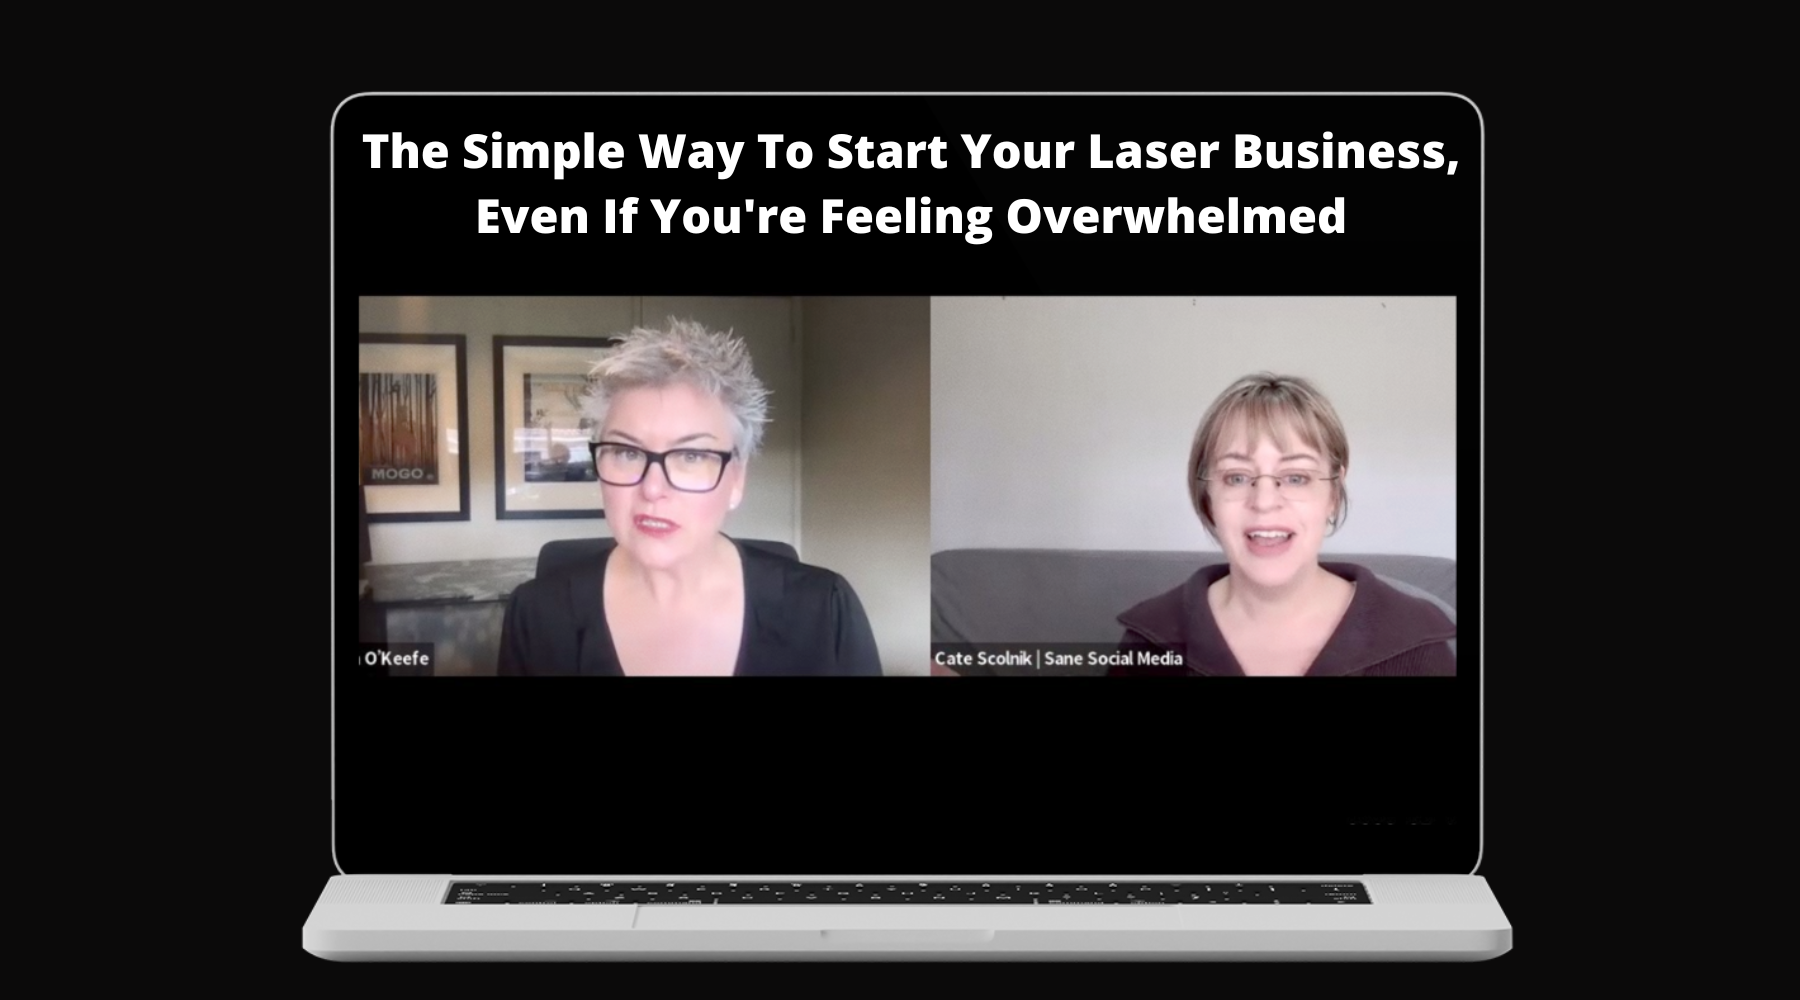 The Simple Way To Start Your Laser Business, Even If You're Feeling Overwhelmed